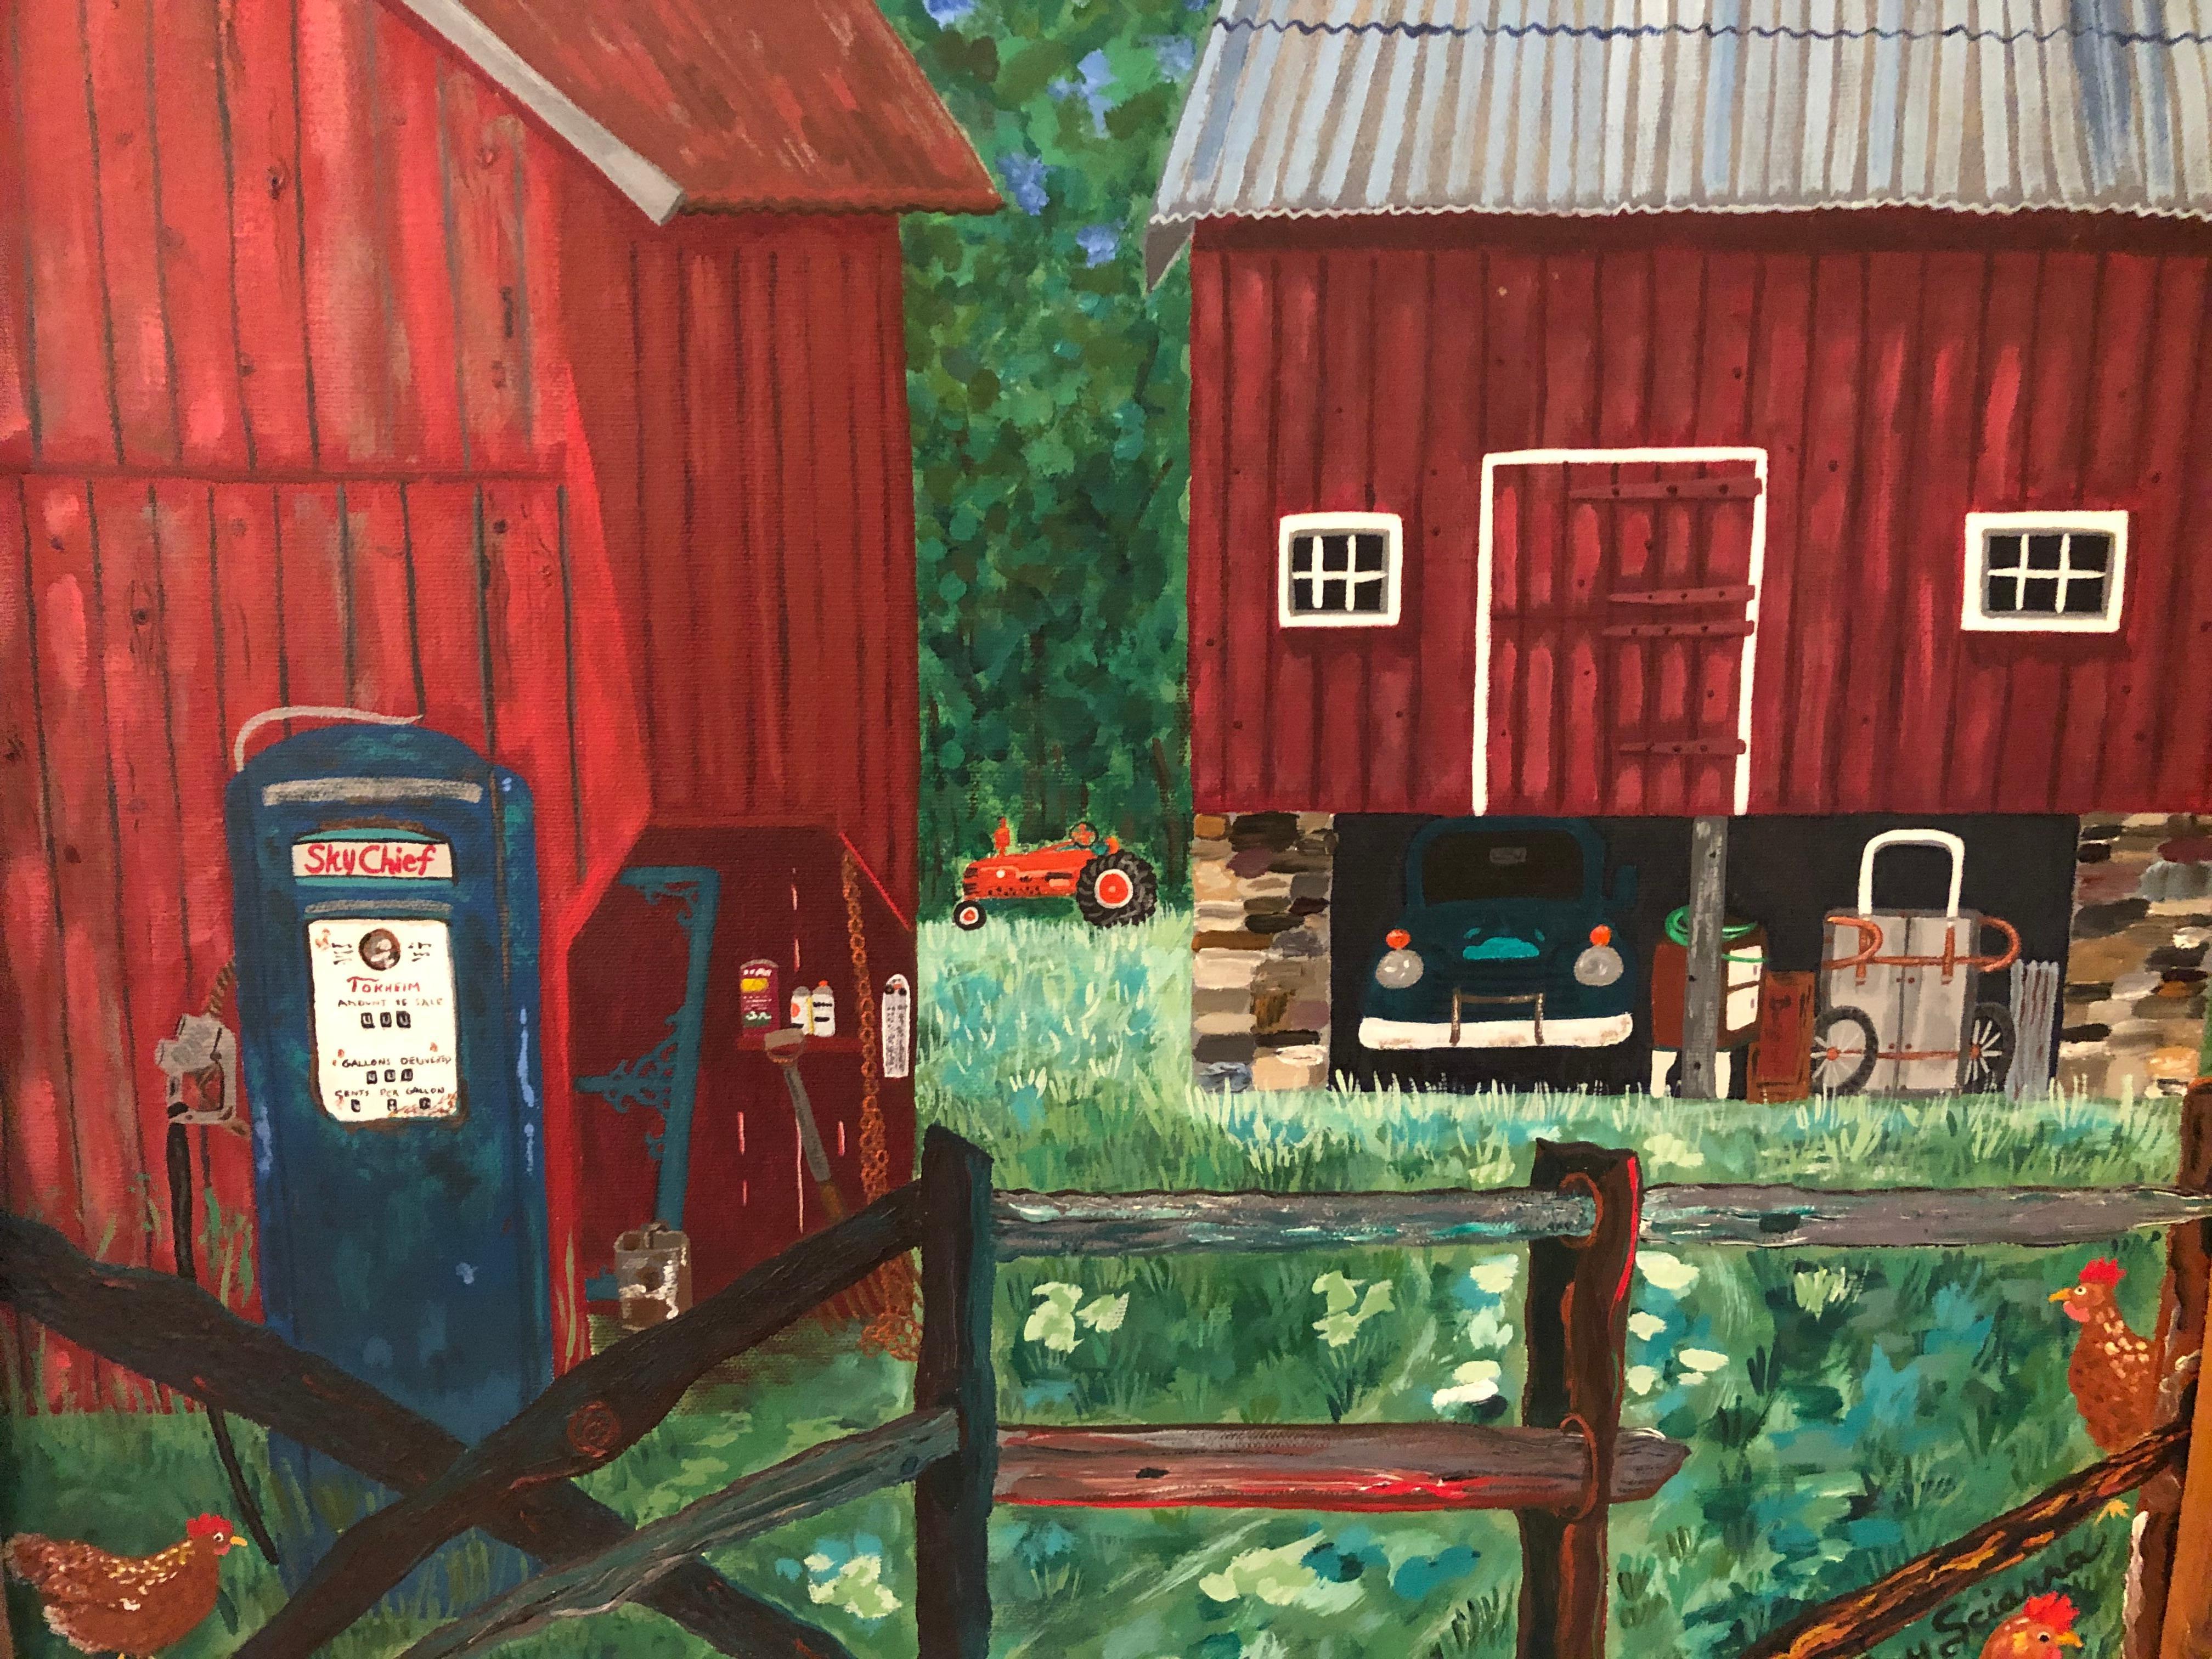 Warm and charming original painting of a local farm's garage with old Skychief gas pump and resident roosters rendered in a faux naive style by Princeton artist Fay Sciarra.  Frame is reclaimed barn wood and appropriate to the subject.